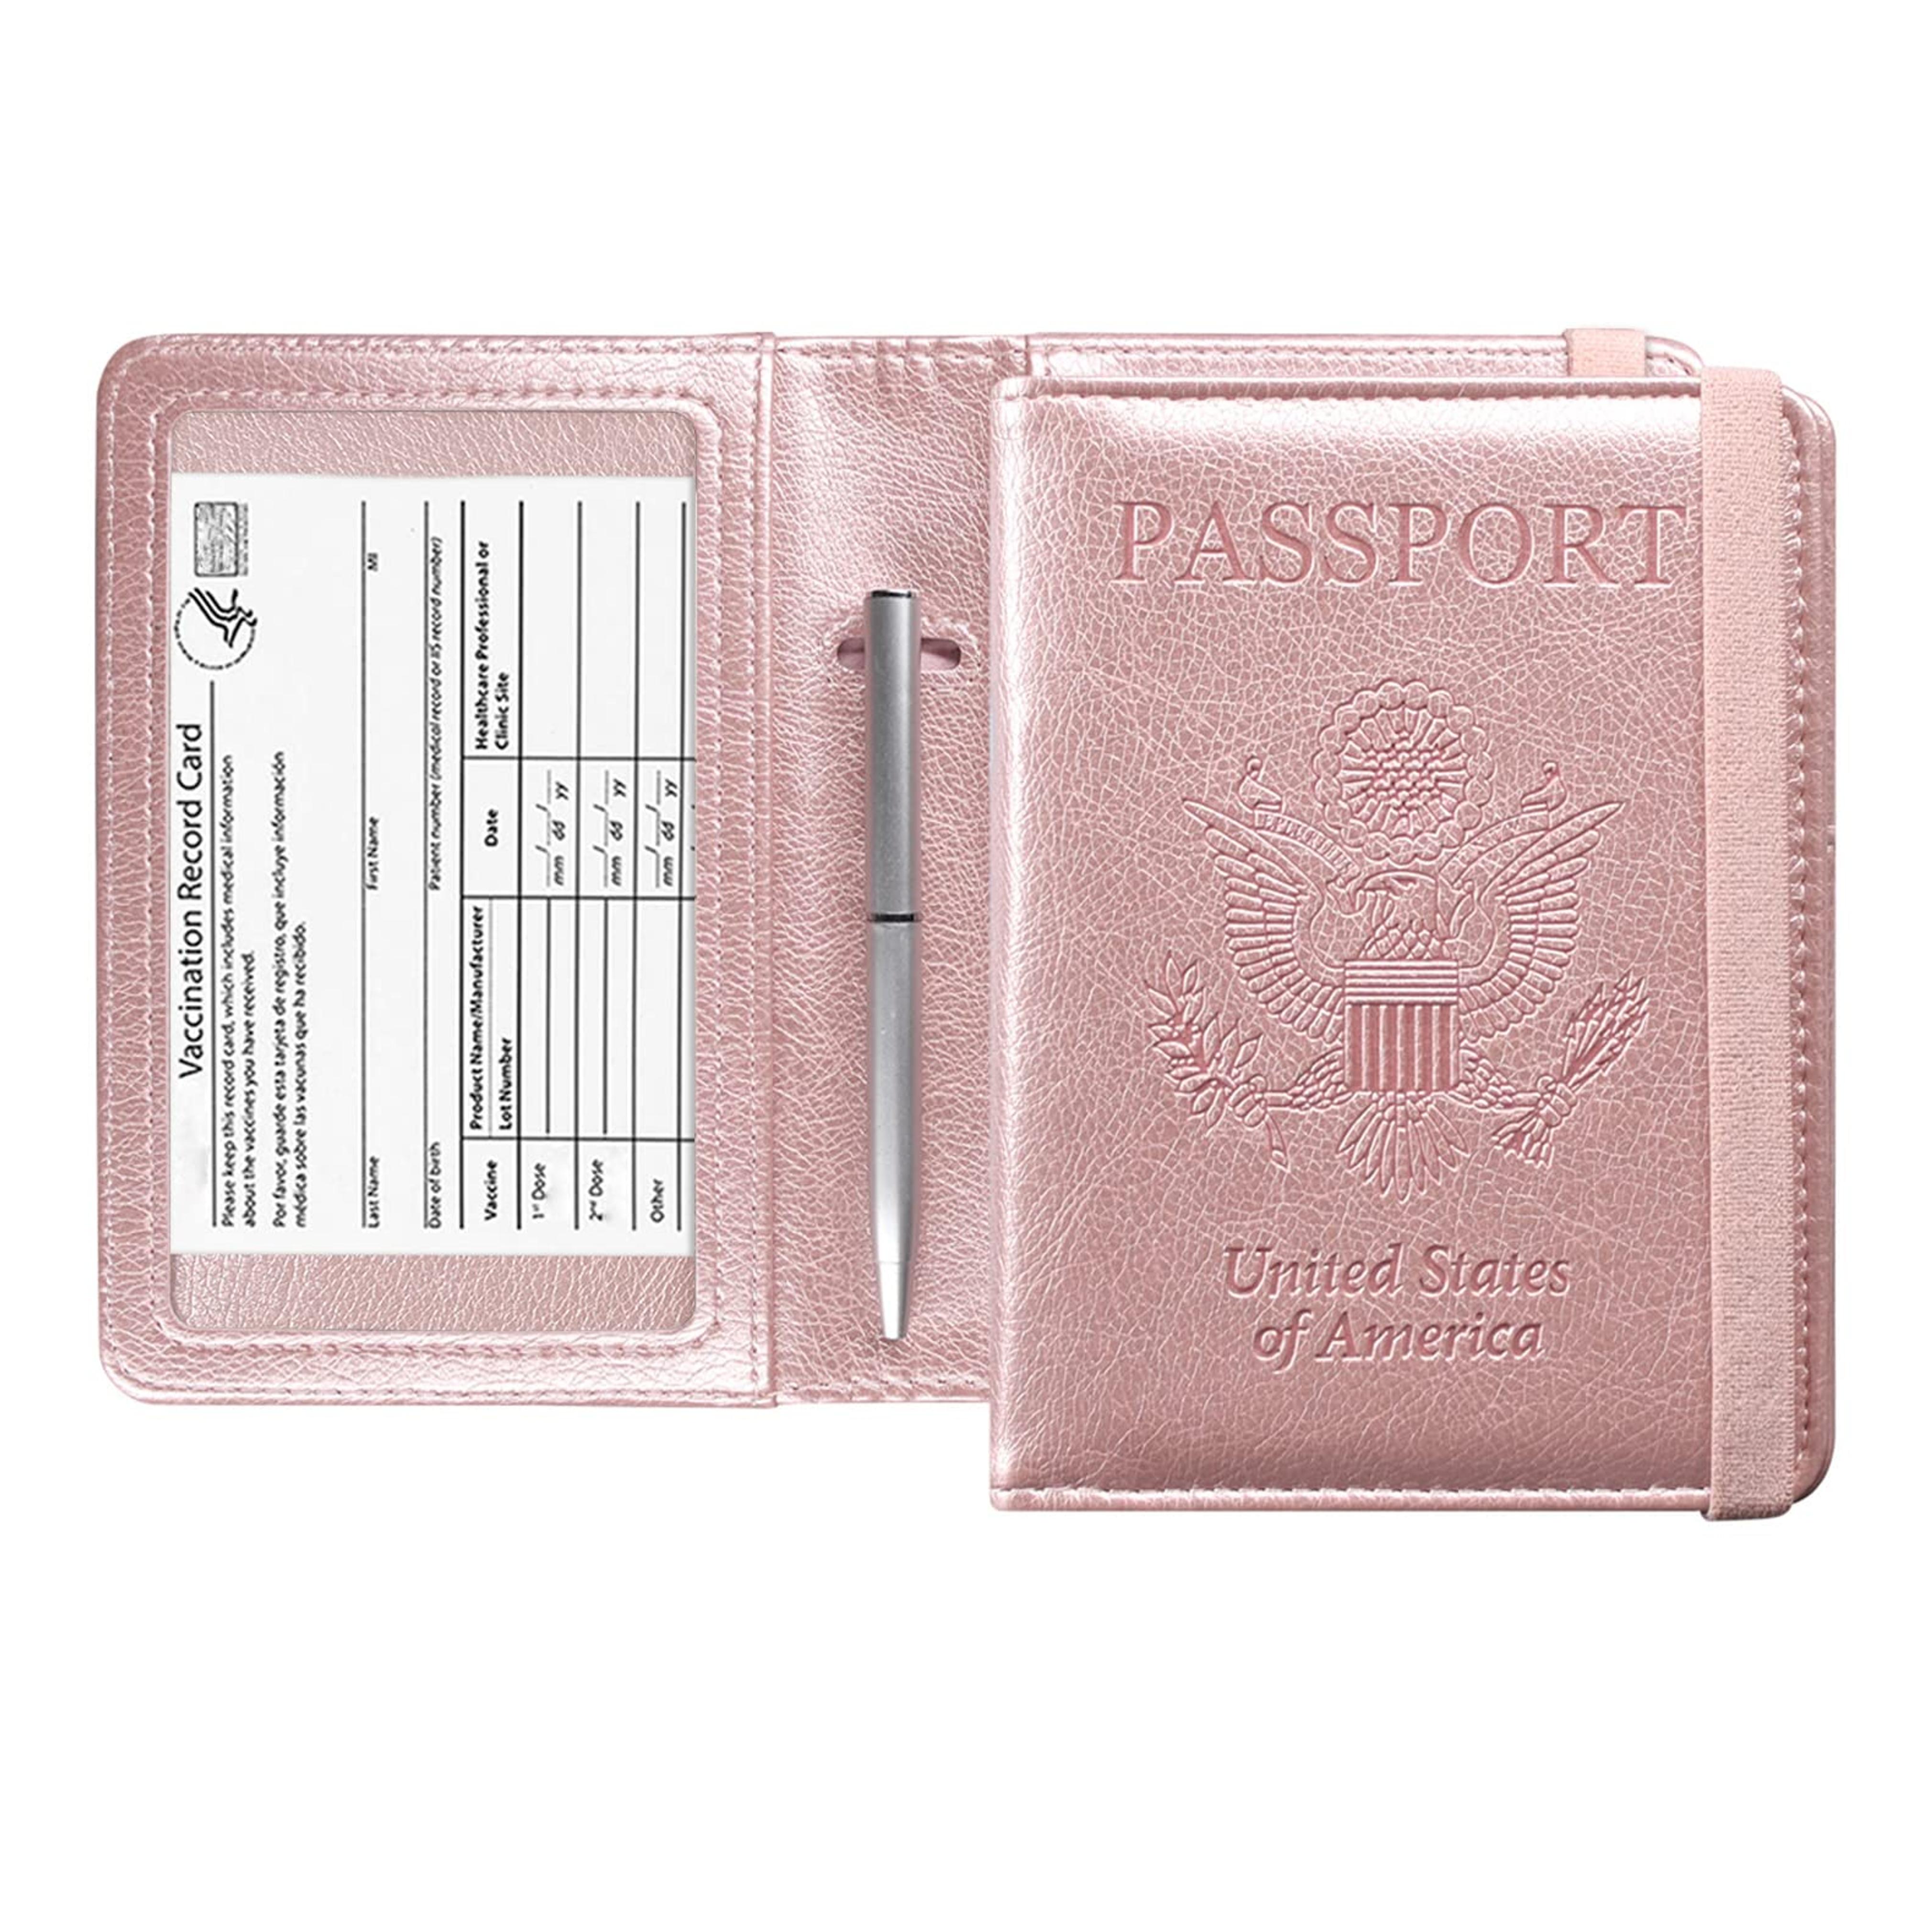 Amazon.com | ACdream Passport and Vaccine Card Holder Combo, Cover Case with CDC Vaccination Card Slot, Leather Travel Documents Organizer Protector, with RFID Blocking, for Women and Men, Rose Gold | Passport Covers